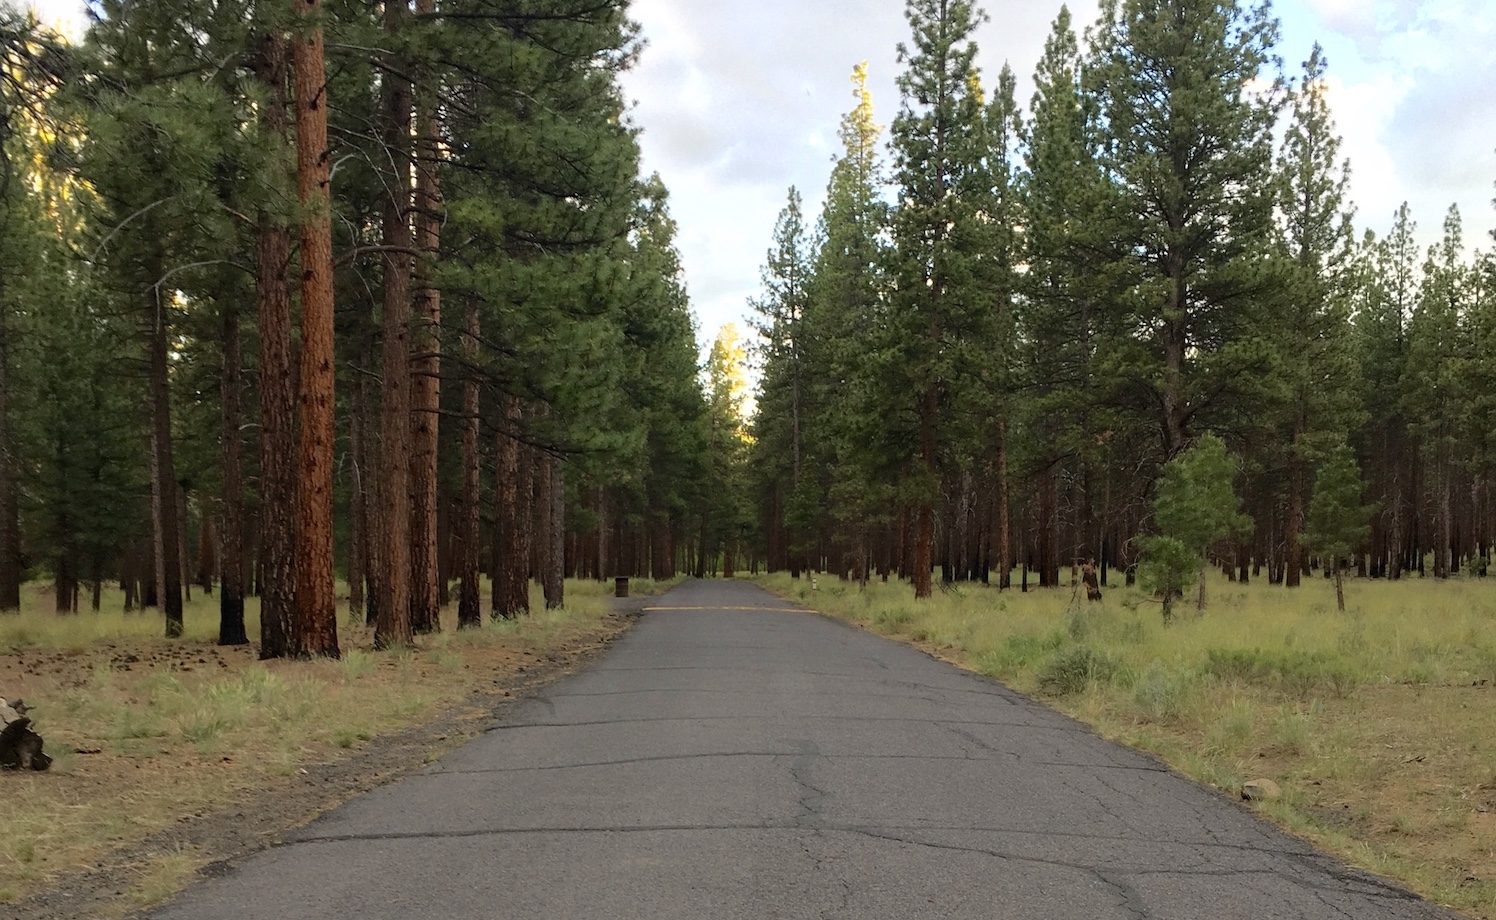 paved road goes through ponderosa forest at shevlin park